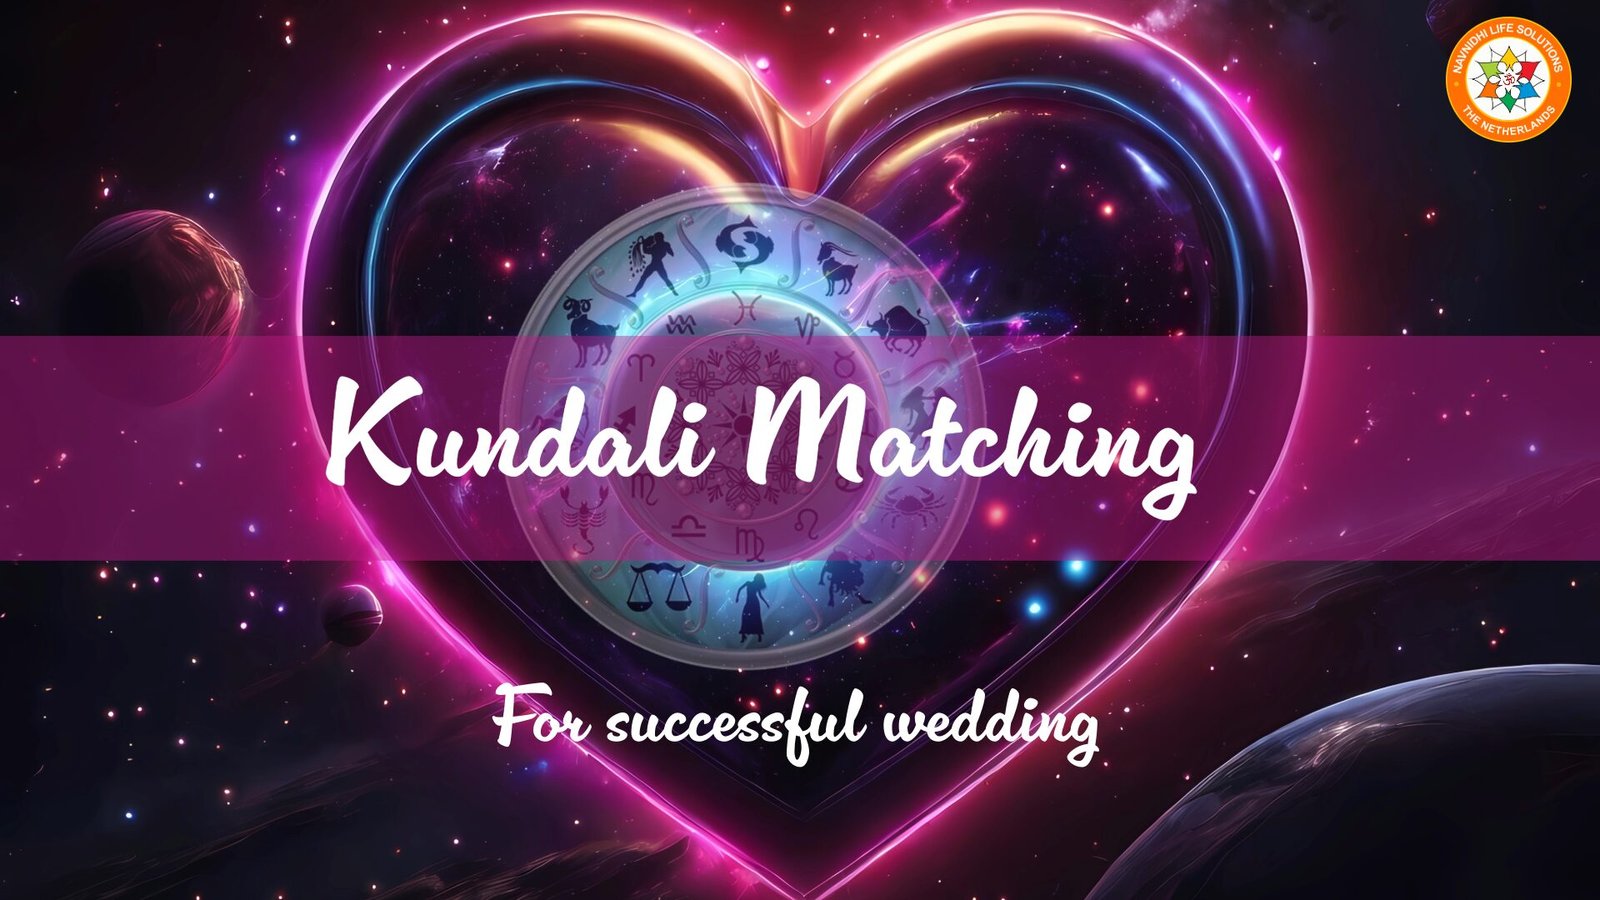 Kundali Matching – A User Guide for successful marriage